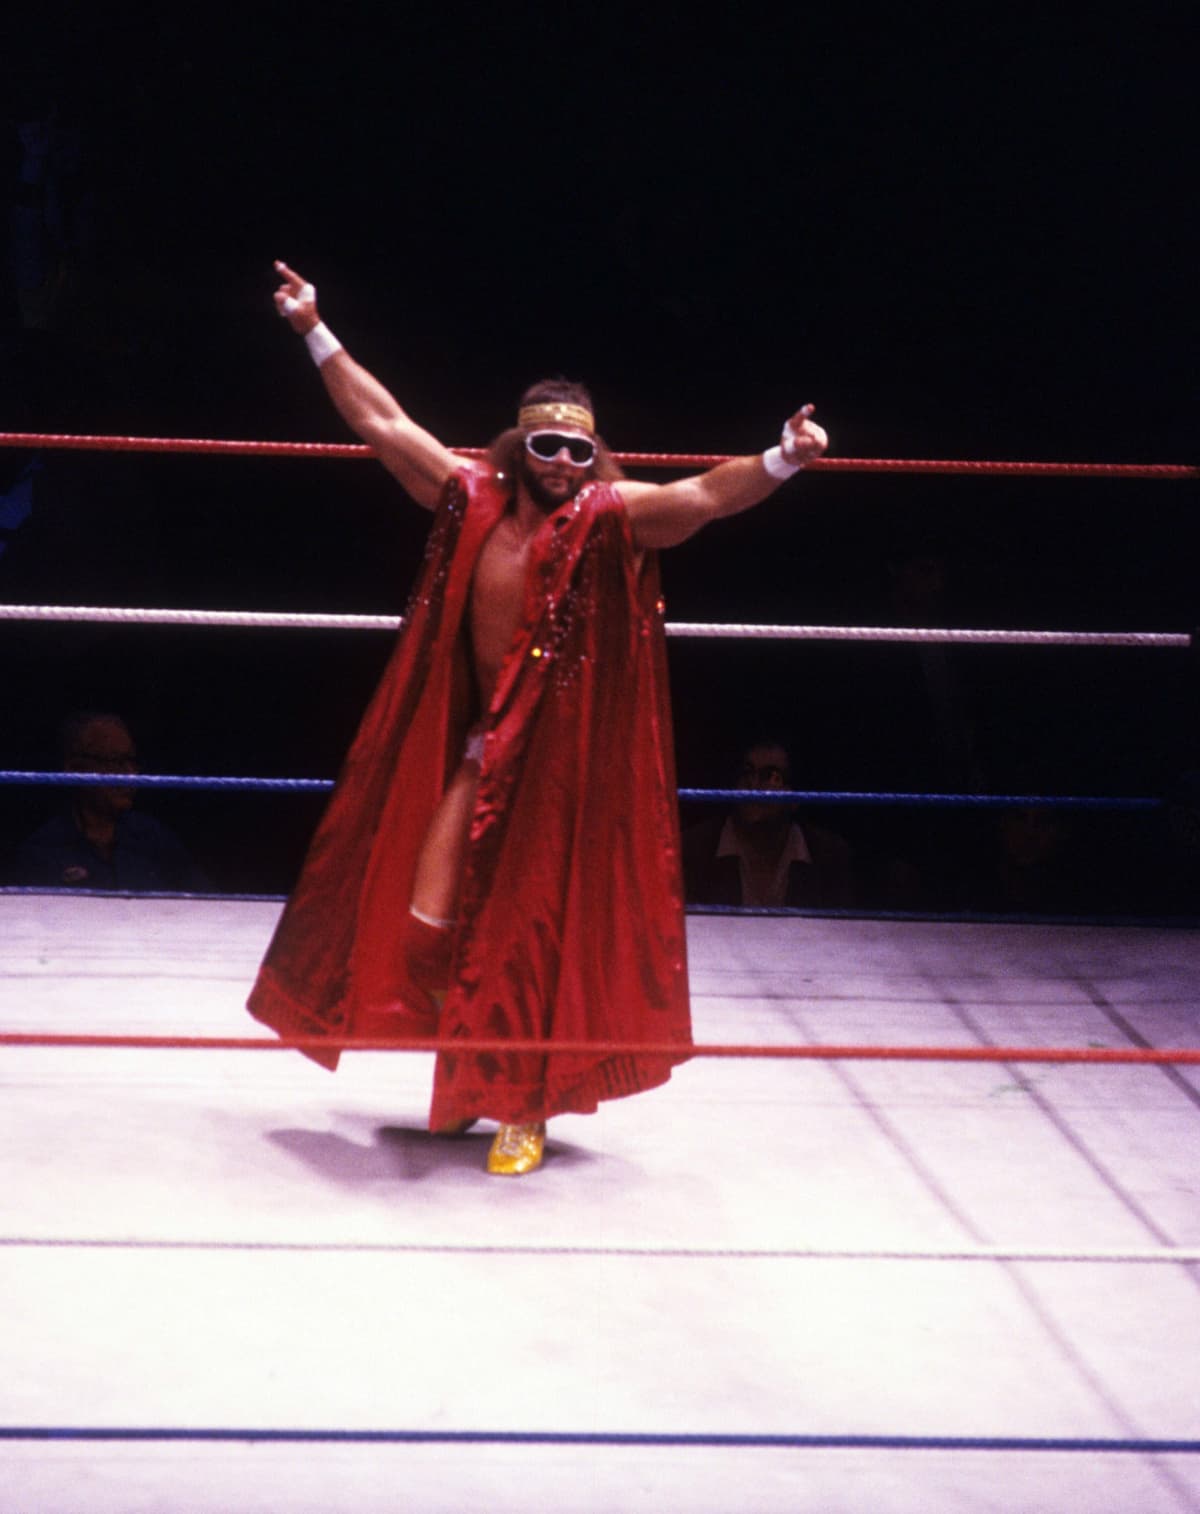 NEW YORK, NY - 1987:  Randy "Macho Man" Savage enters the ring before a WWF match against Sika circa 1987 at the Madison Square Garden in New York, New York.  (Photo by B Bennett/Getty Images)